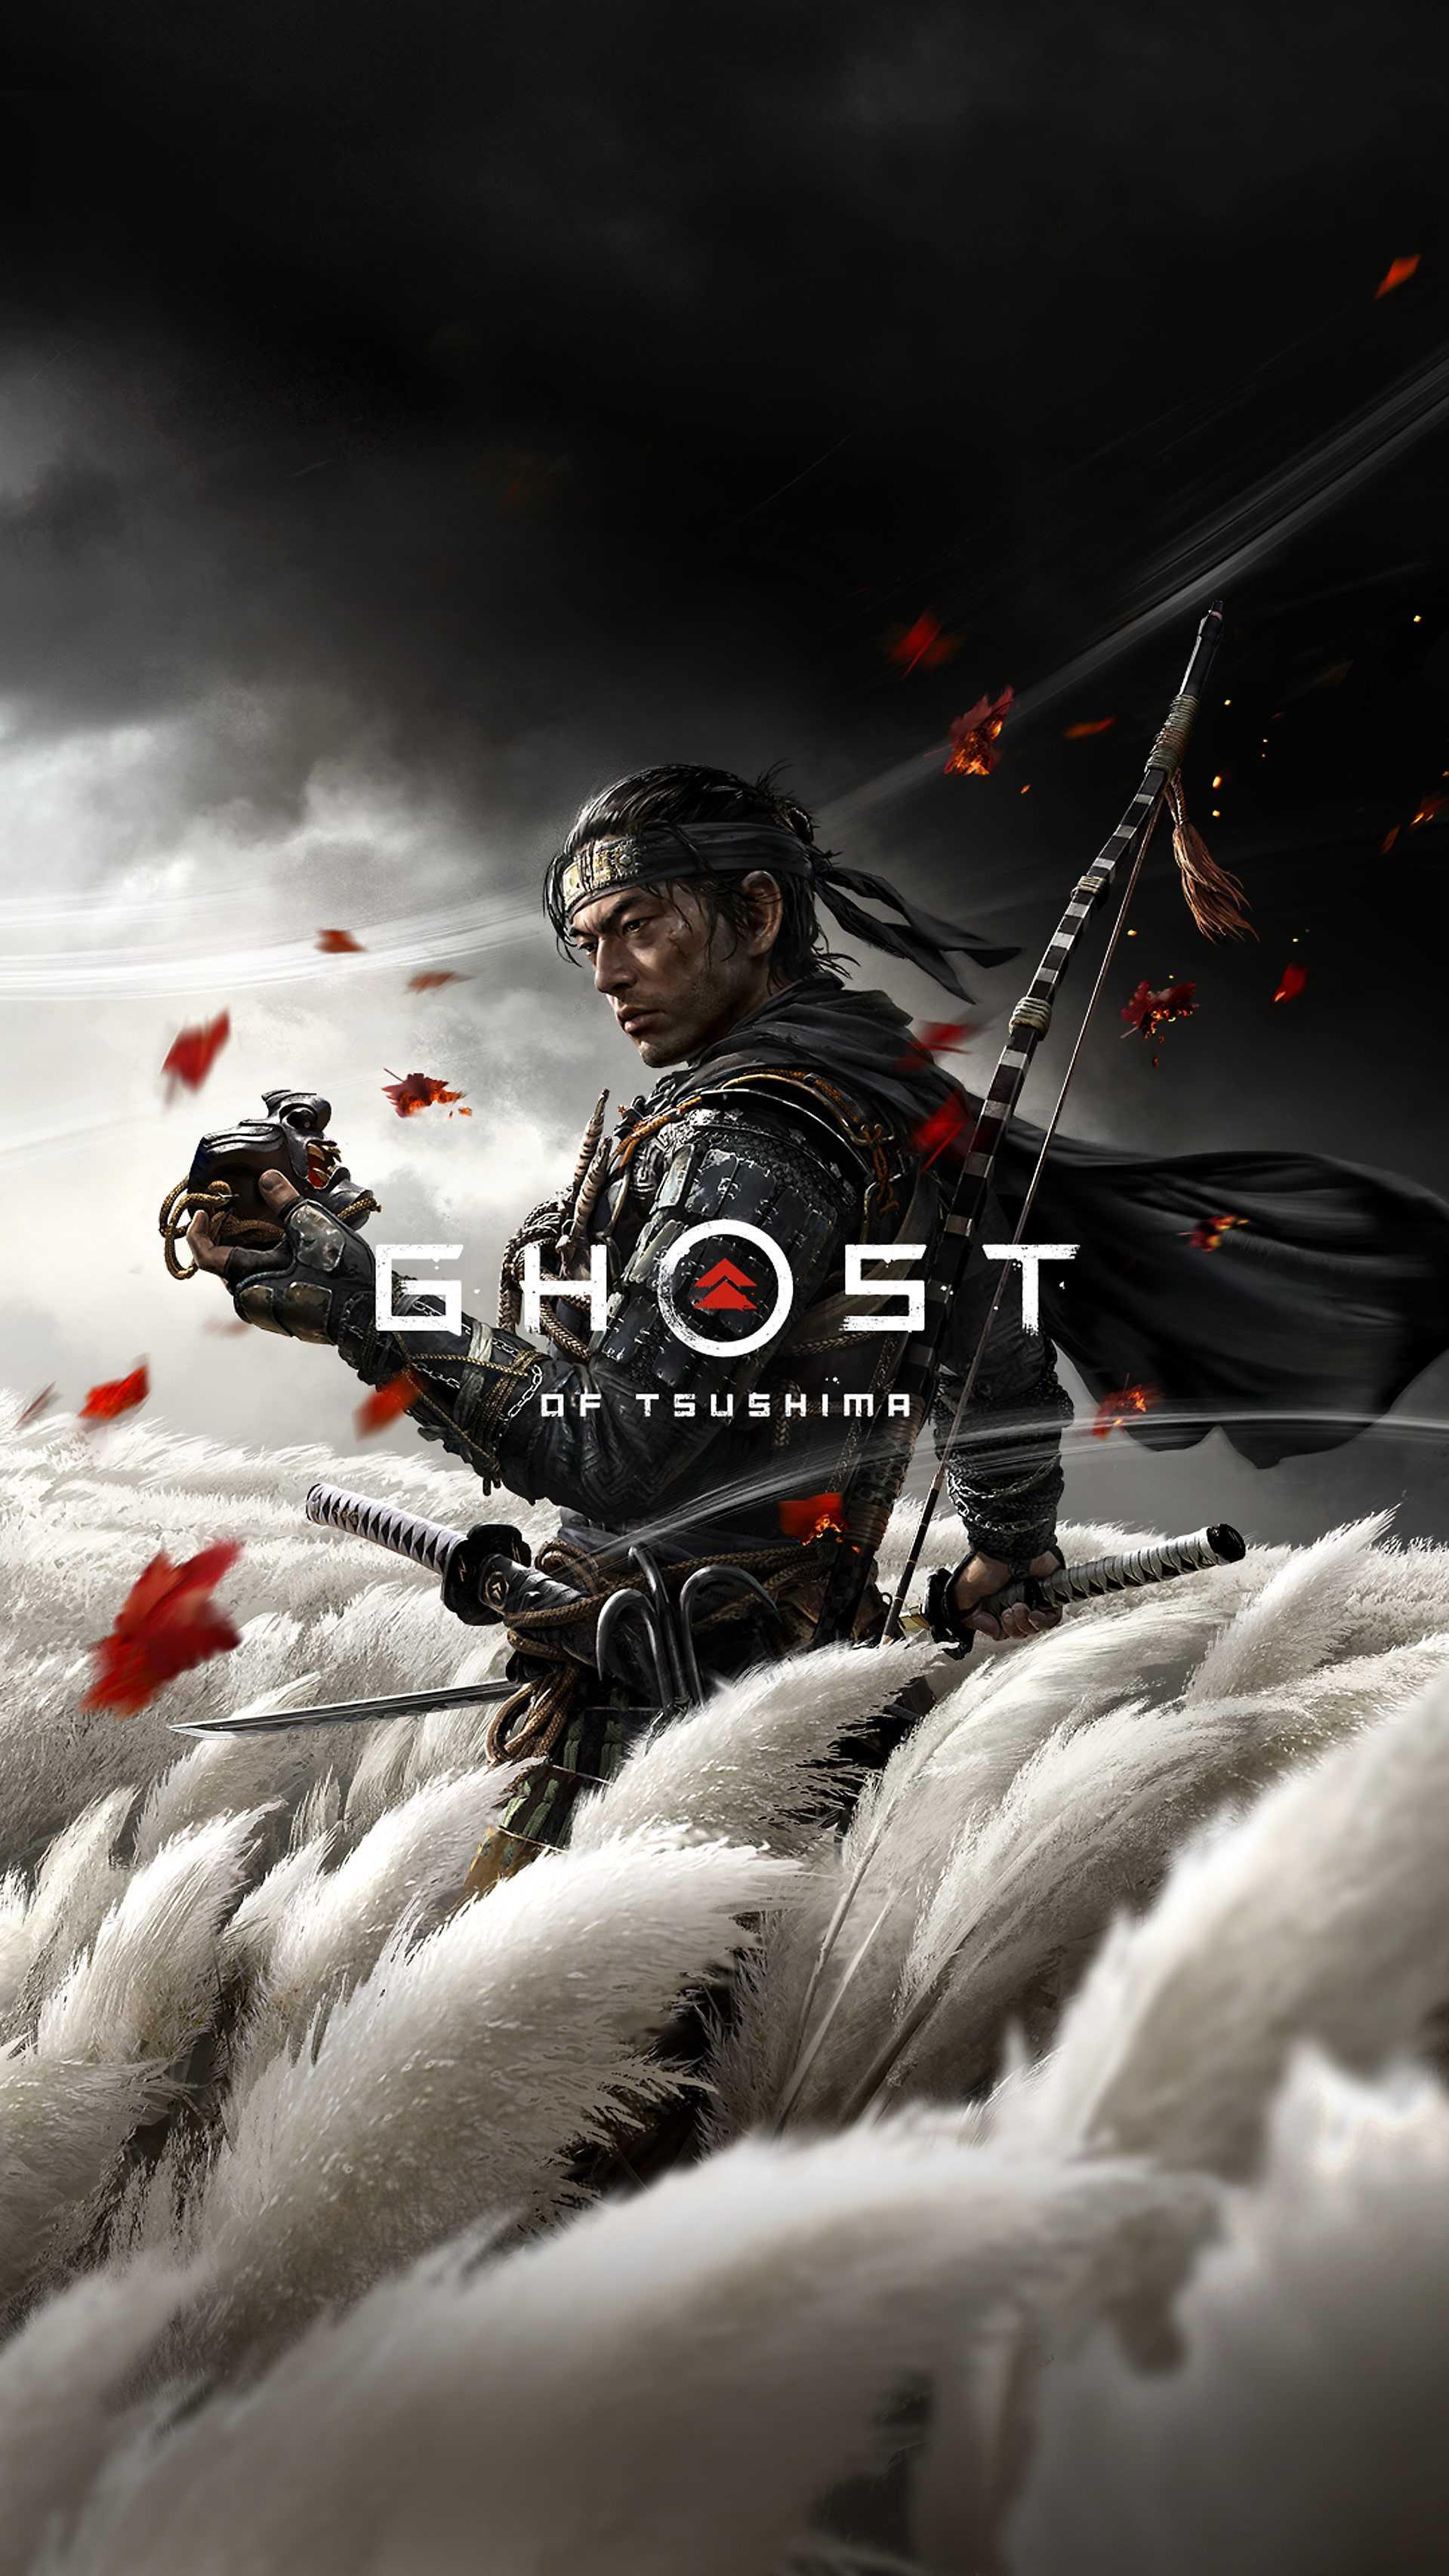 1919 x 3412 · jpeg - Android Ghost of Tsushima Wallpaper - KoLPaPer - Awesome Free HD Wallpapers